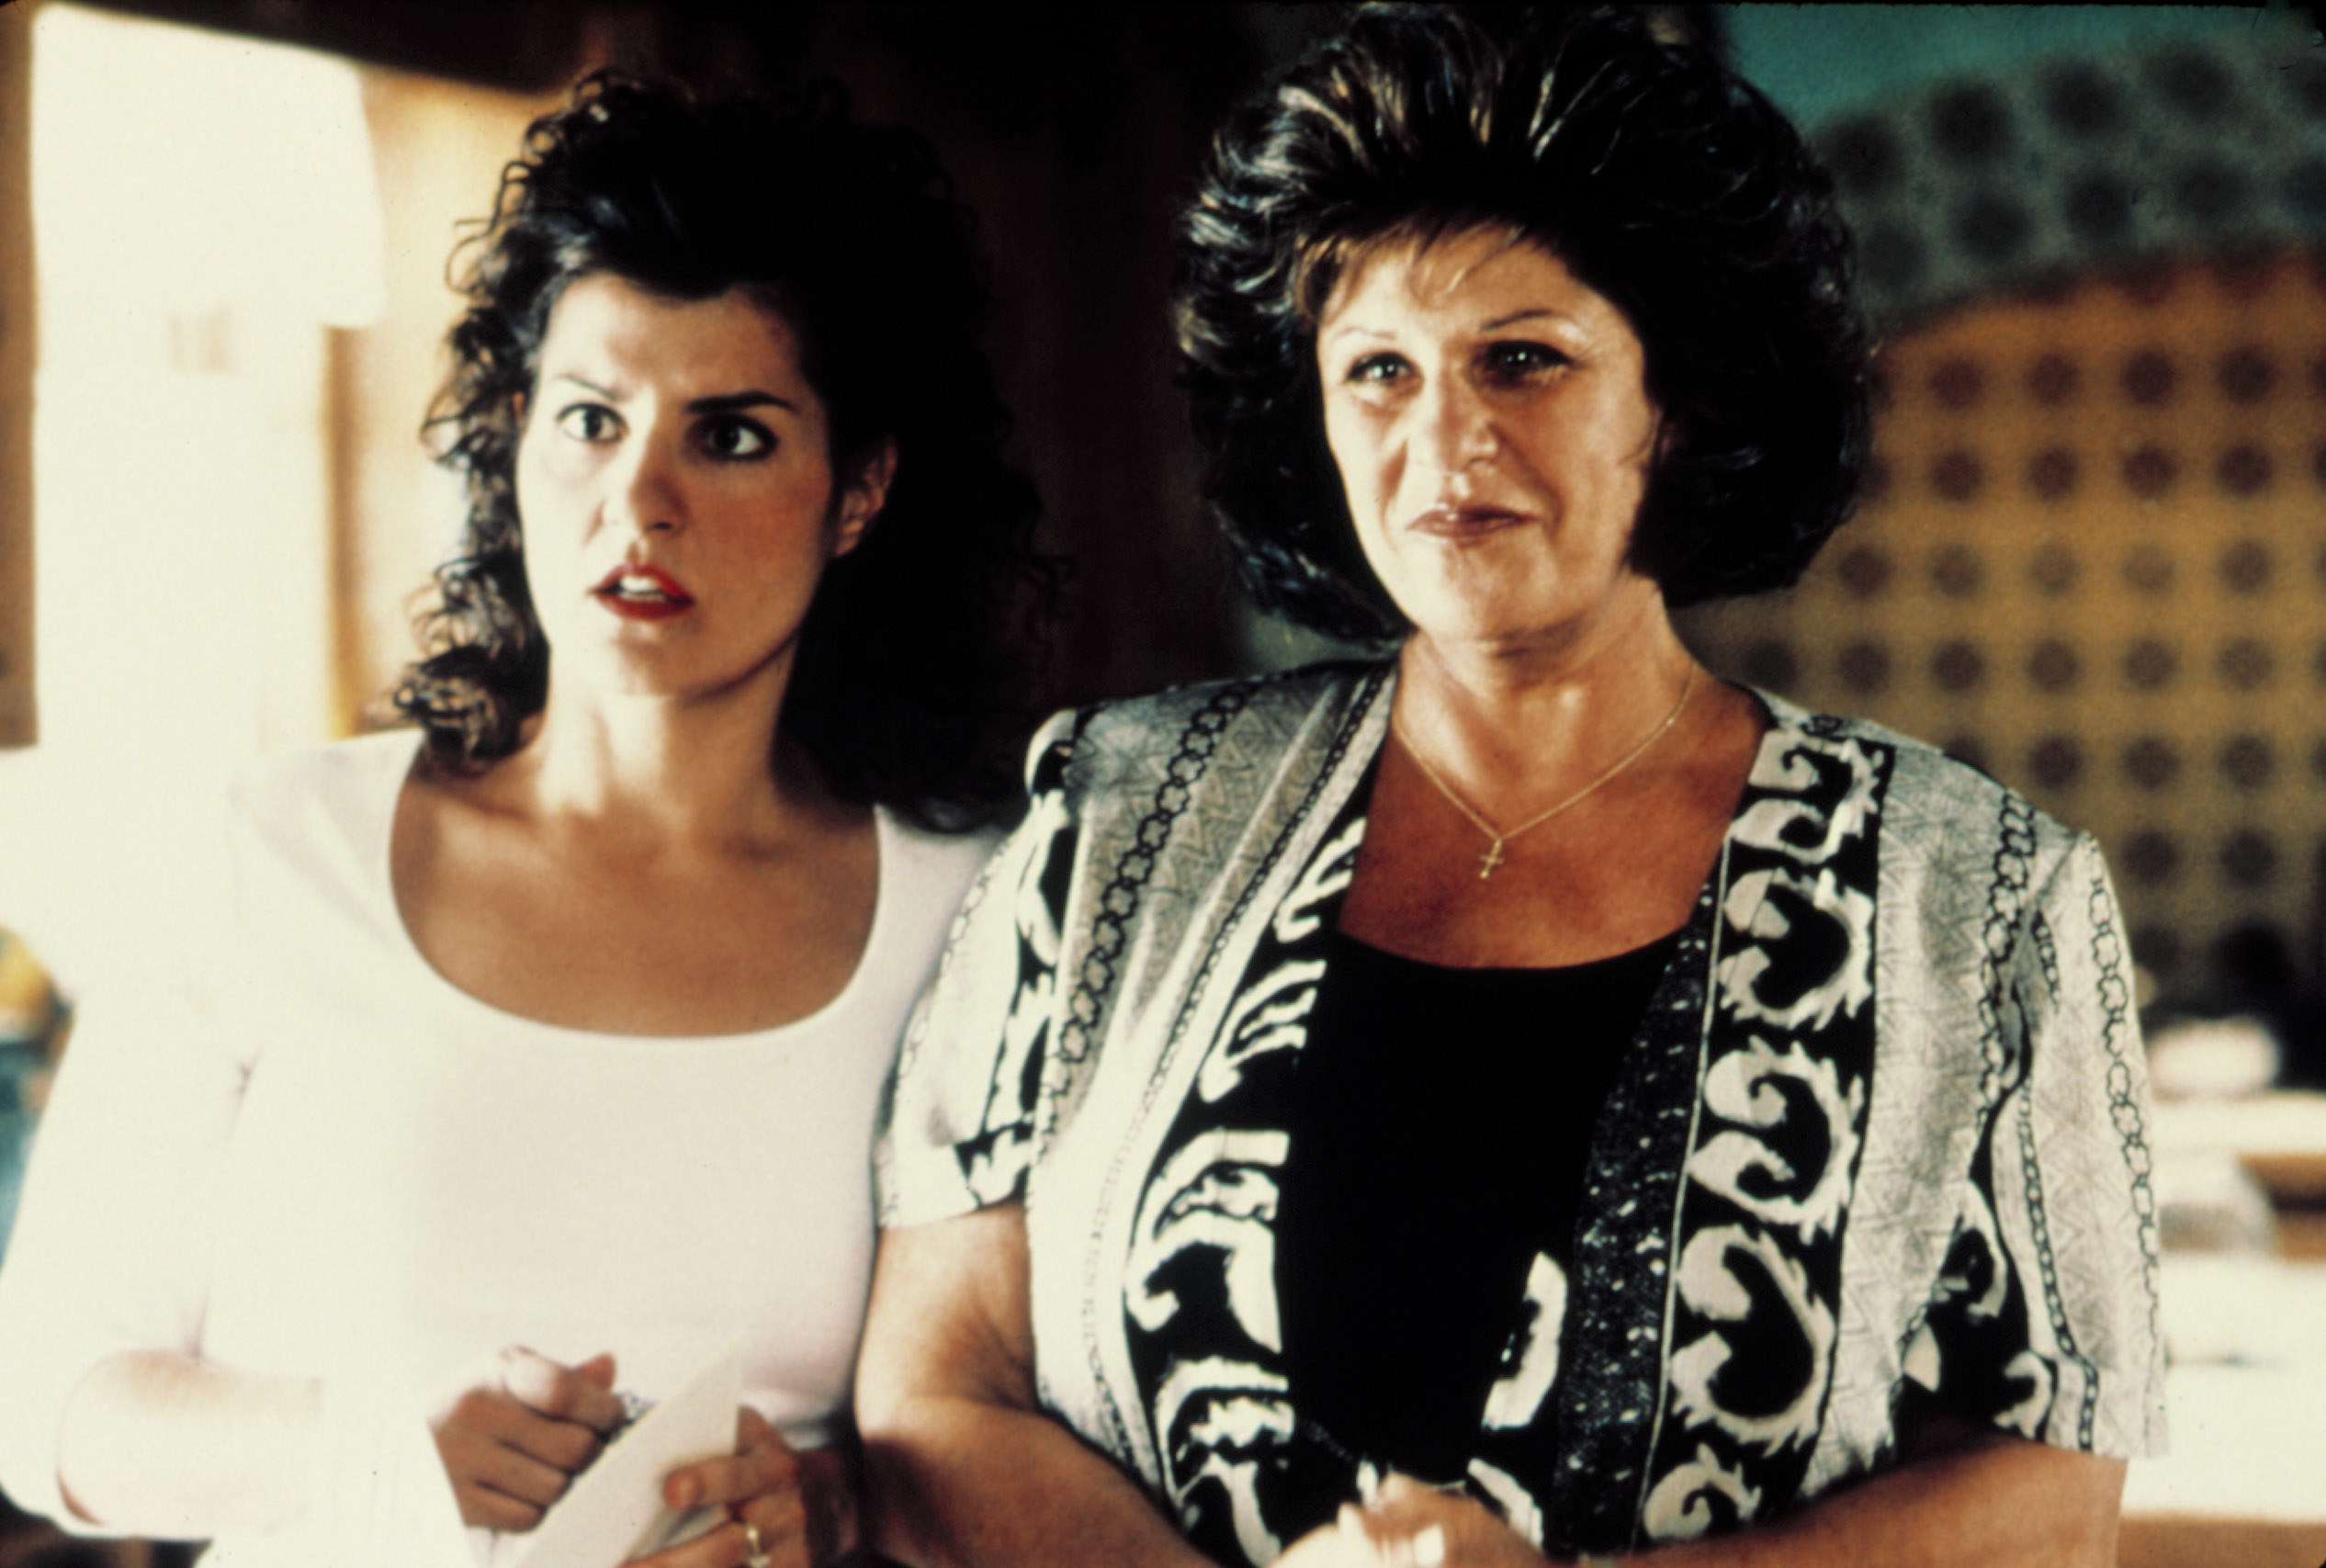 Nia Vardalos and Lainie Kazan stand in their kitchen and look shocked at something offscreen